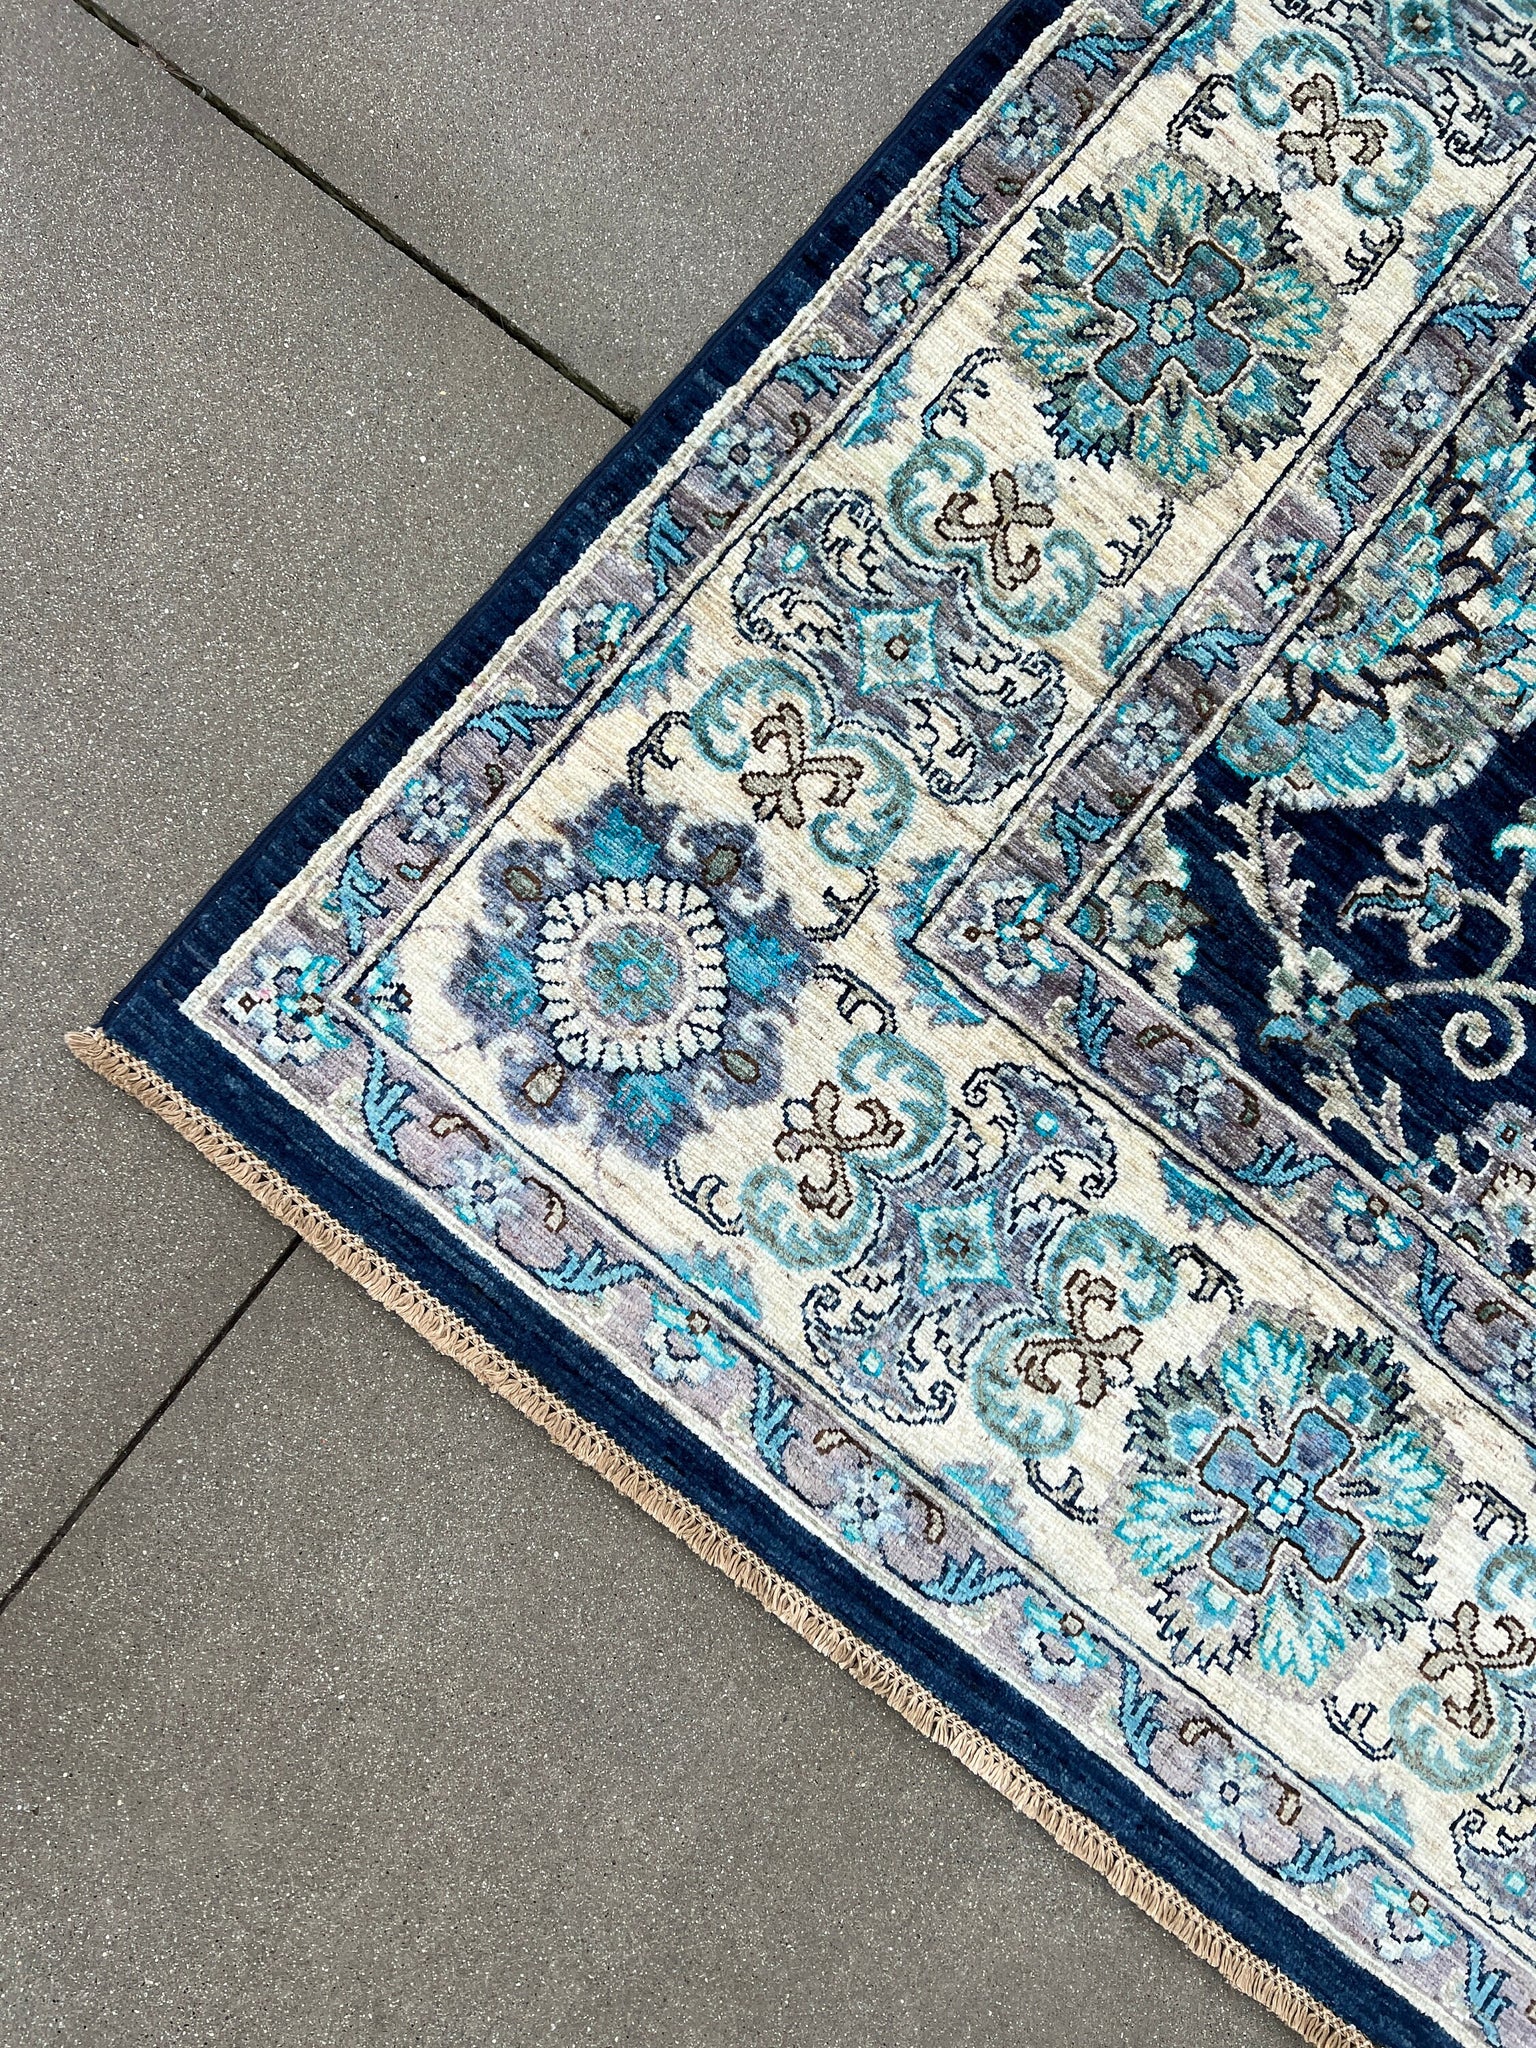 8x11~8x12 Handmade Afghan Rug | Navy Blue Turquoise Ivory Cream Beige Grey Brown Green | Turkish Oushak Hand Knotted Wool Floral Woolen